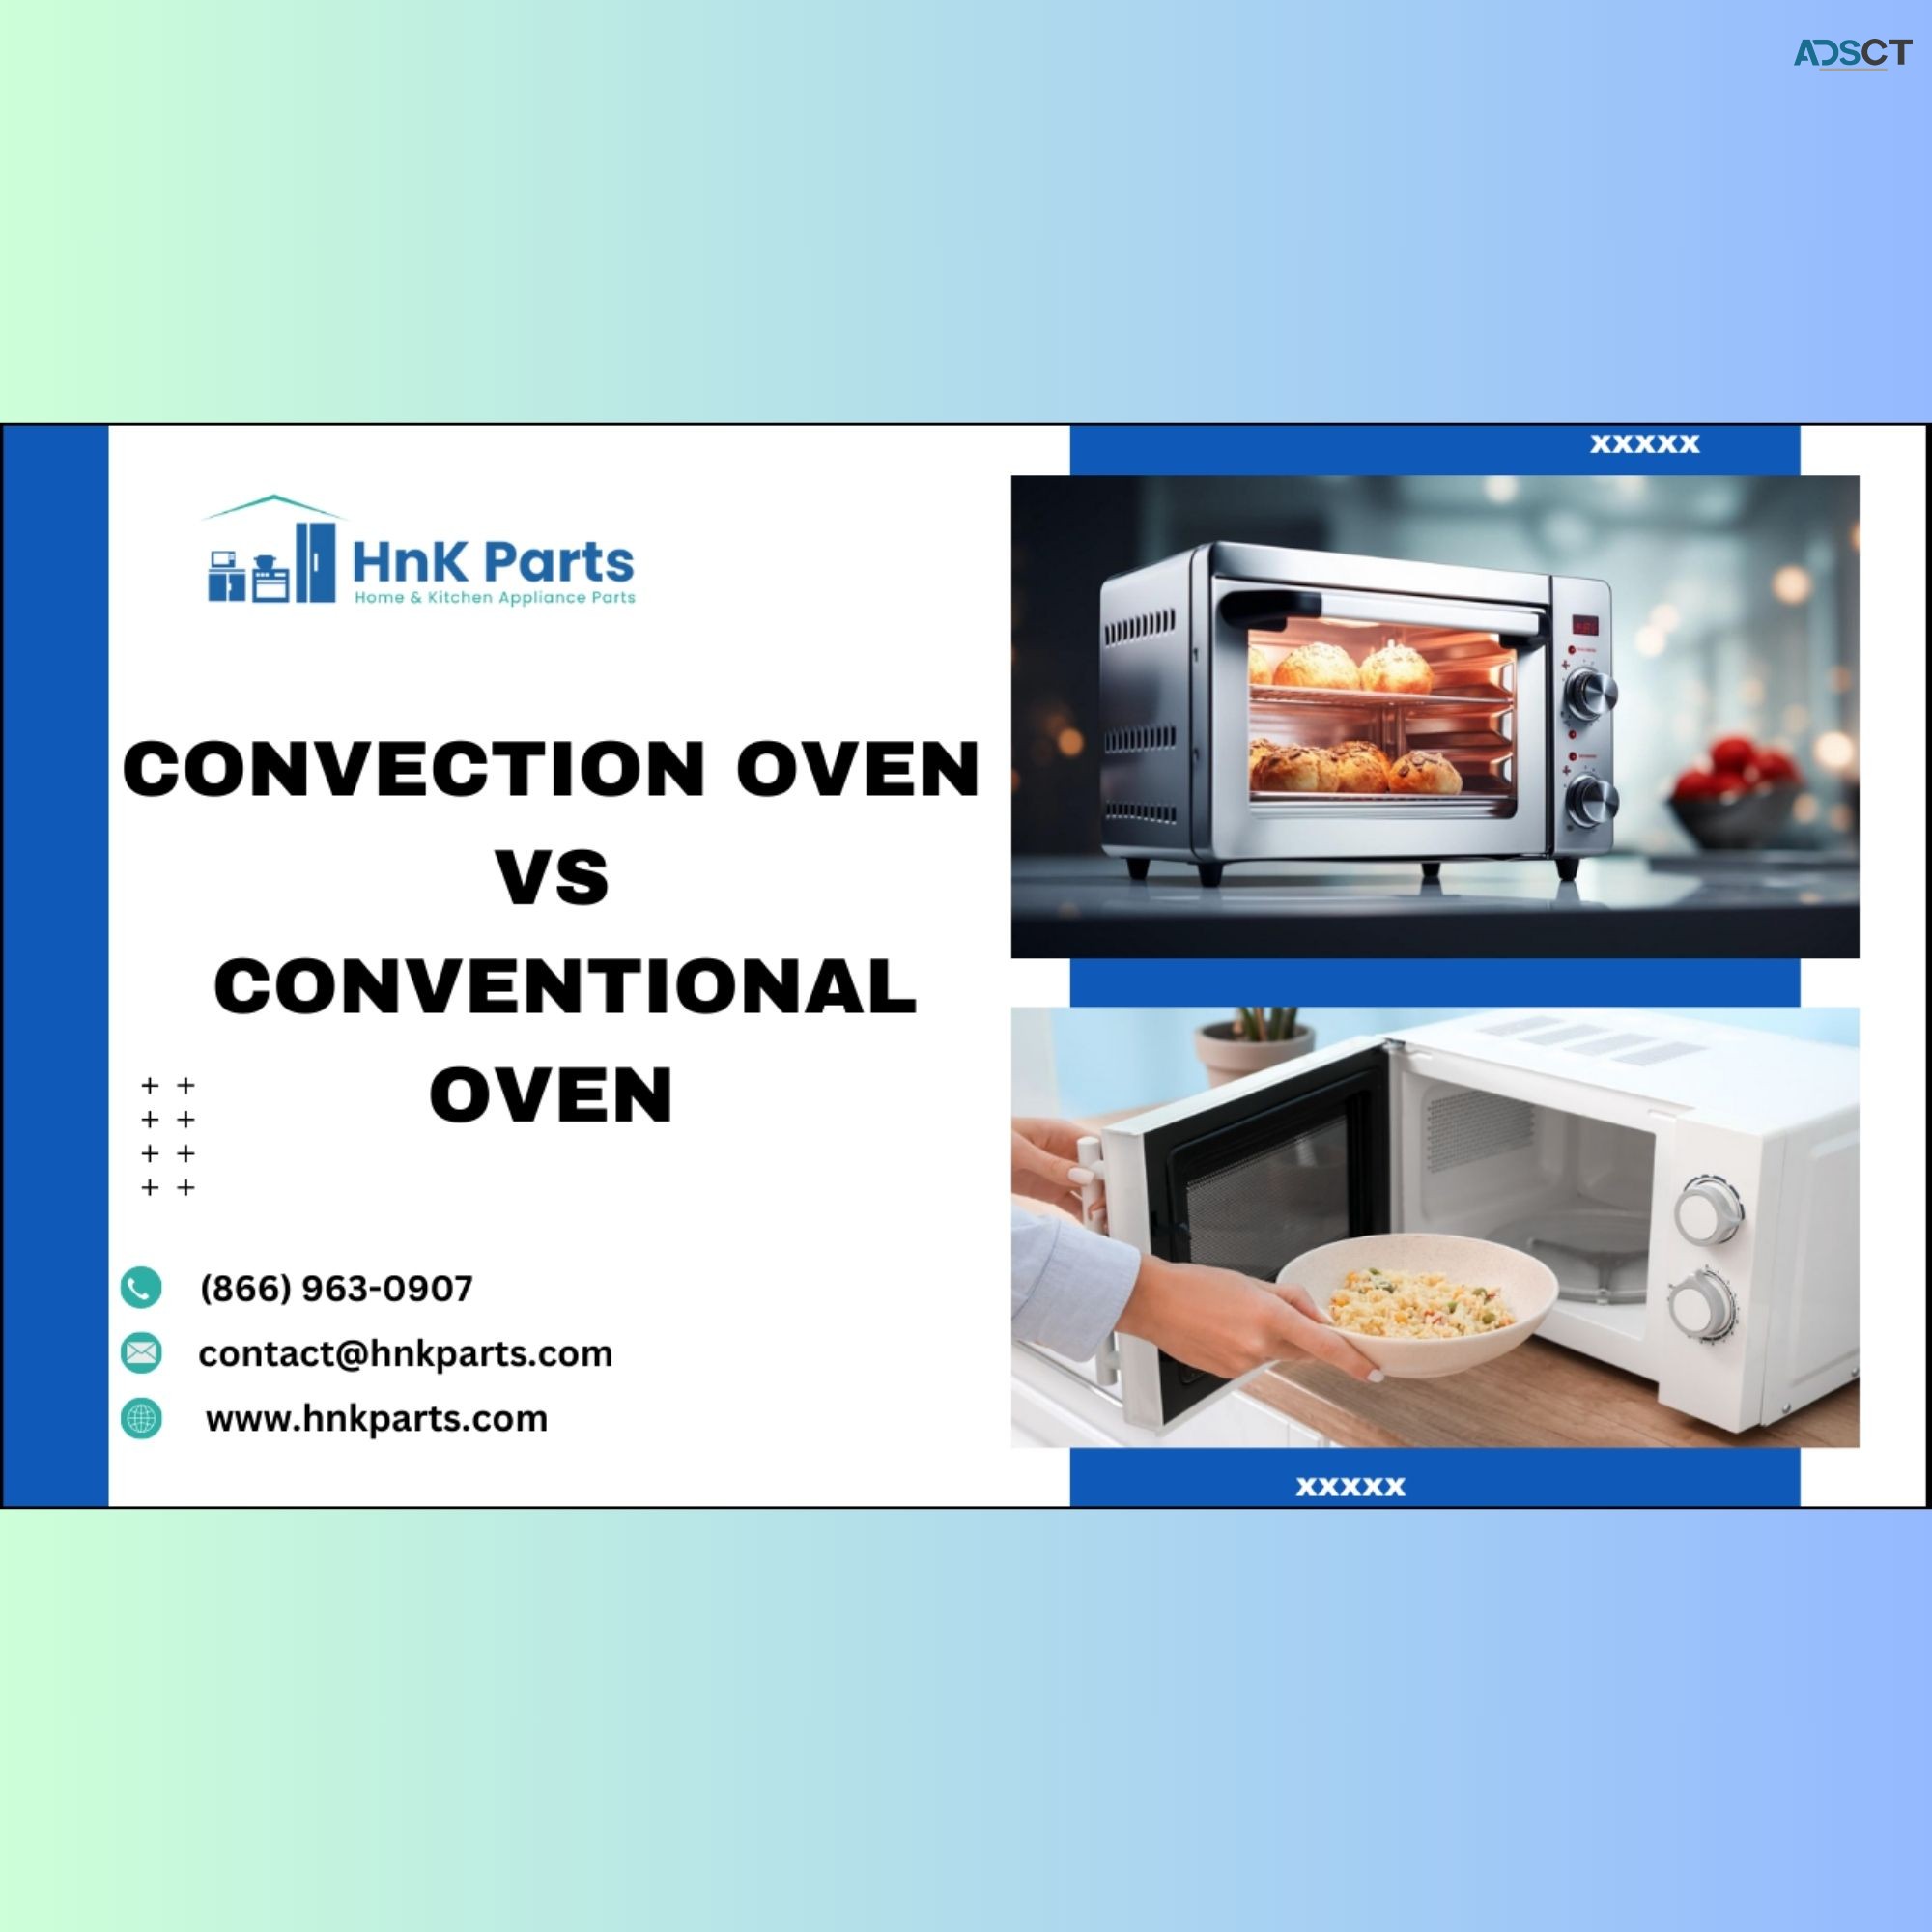 Convection Vs Conventional Oven: What's 